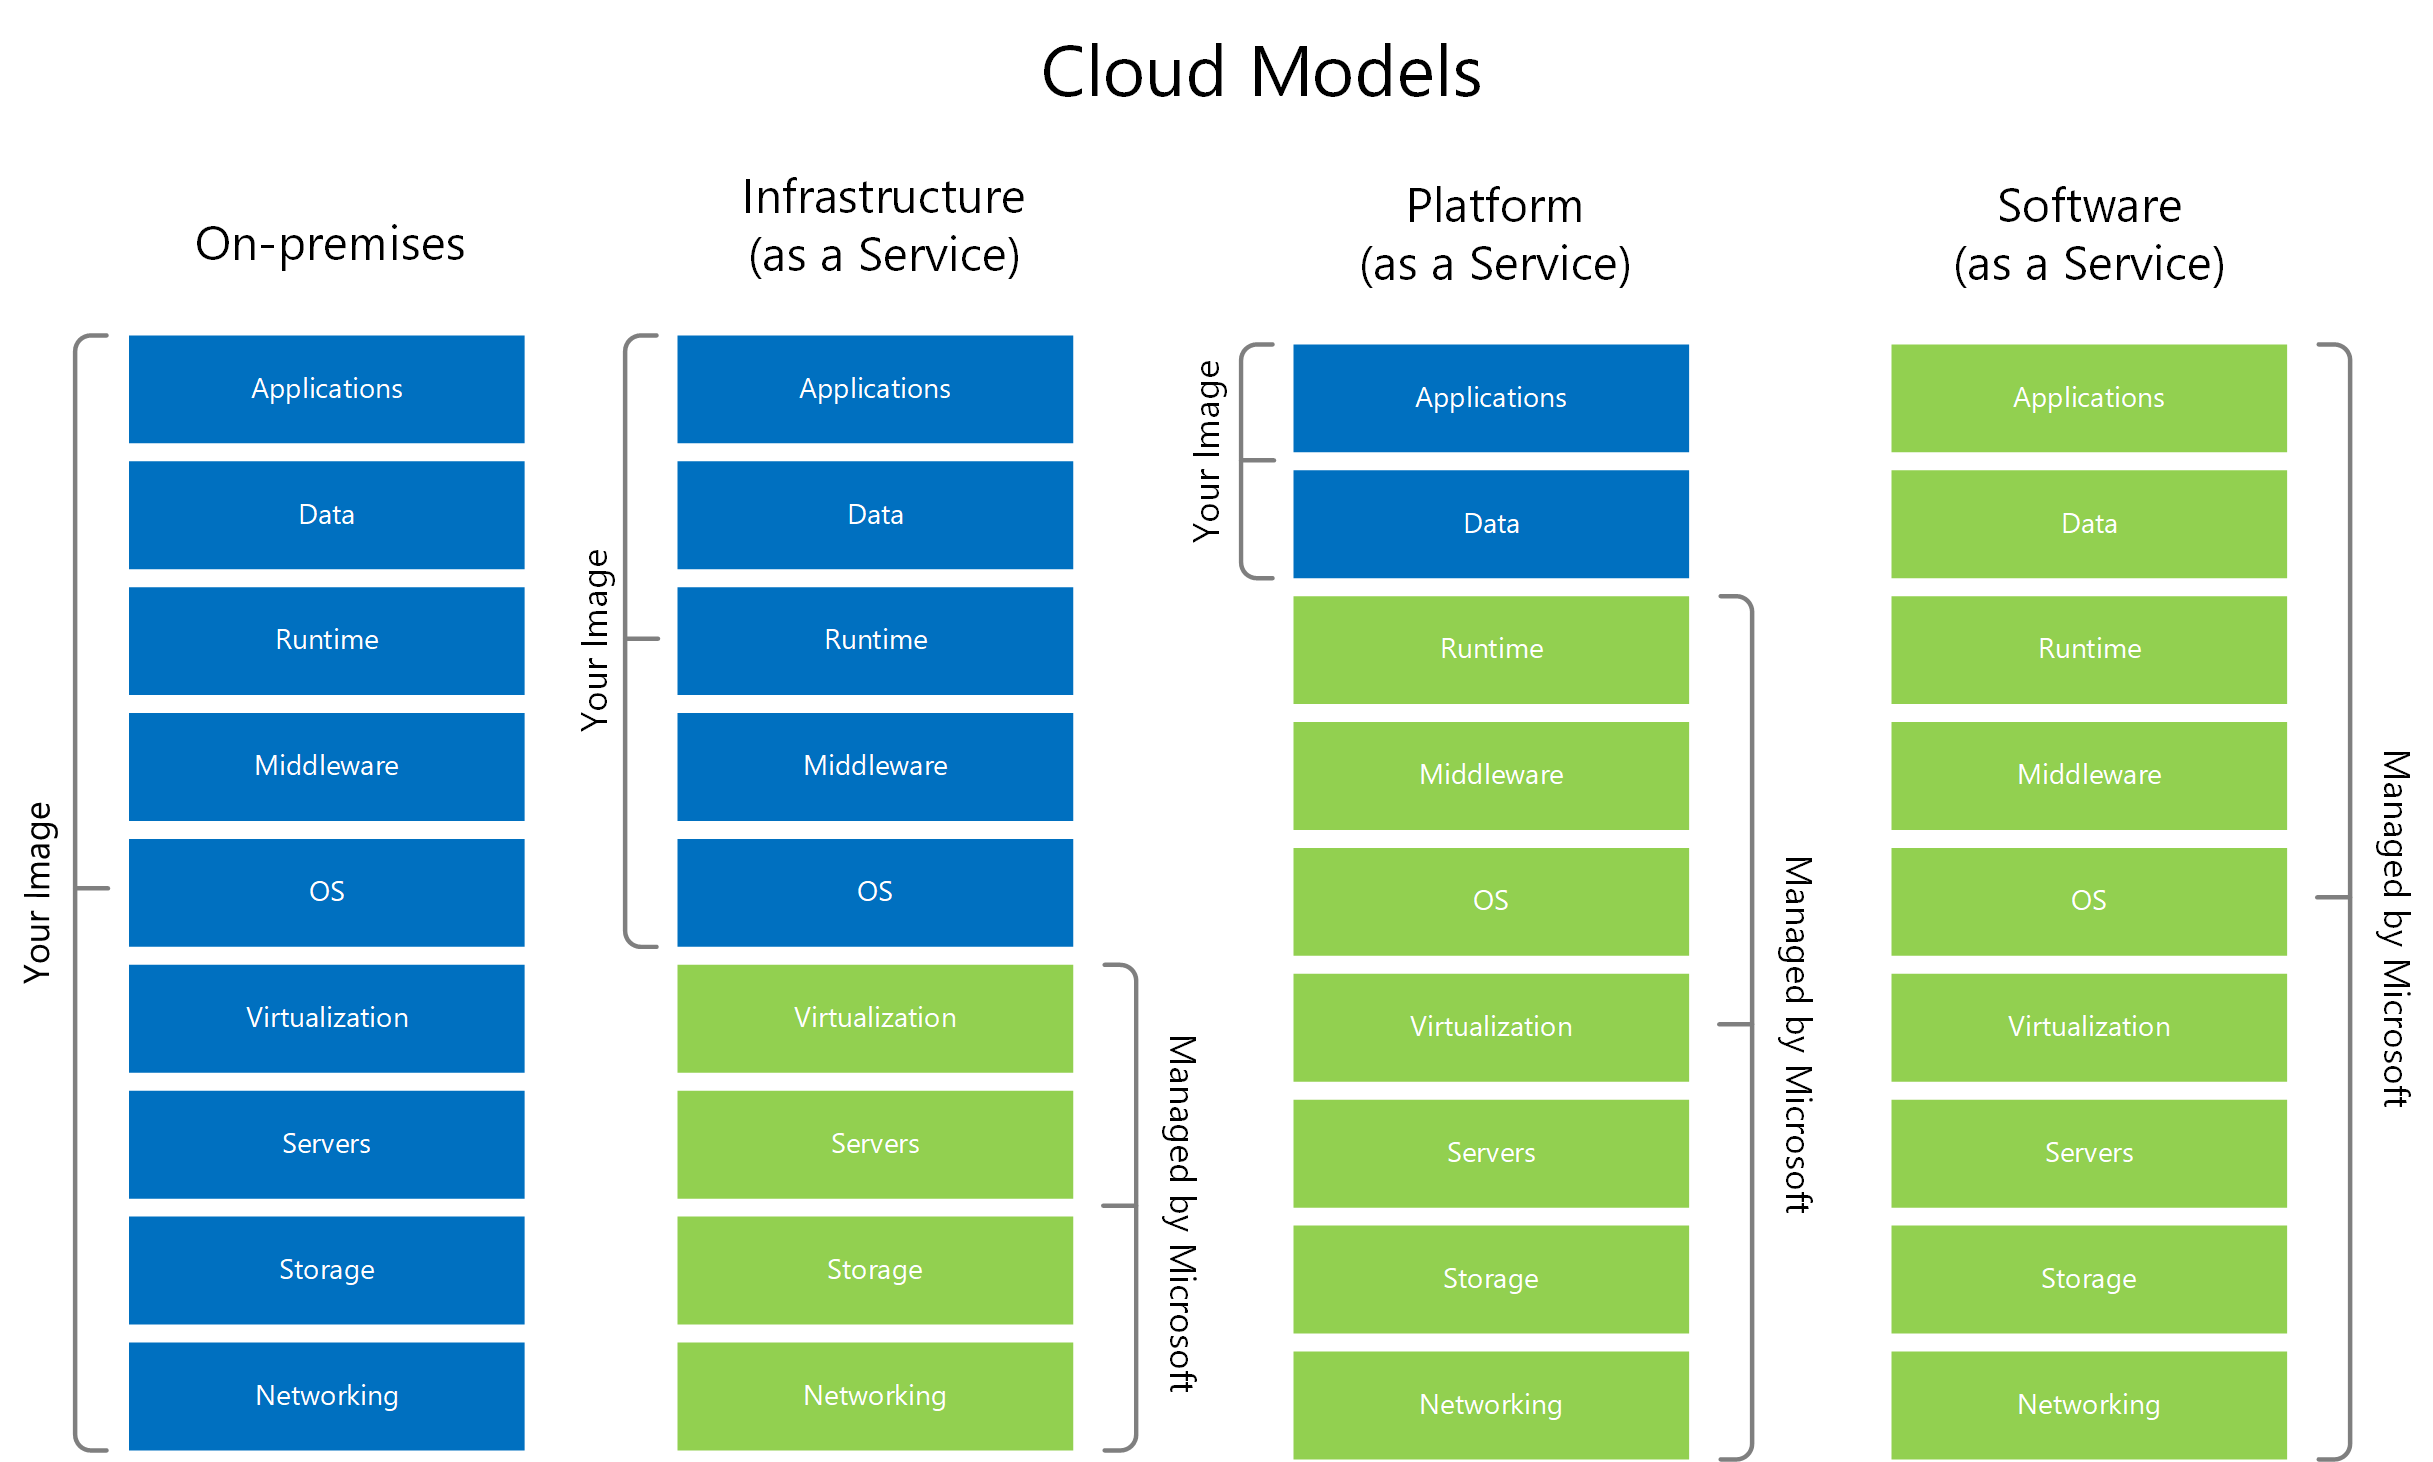 Diagram of cloud models, including on-premises, infrastructure as a service, platform as a service, and software as a service.